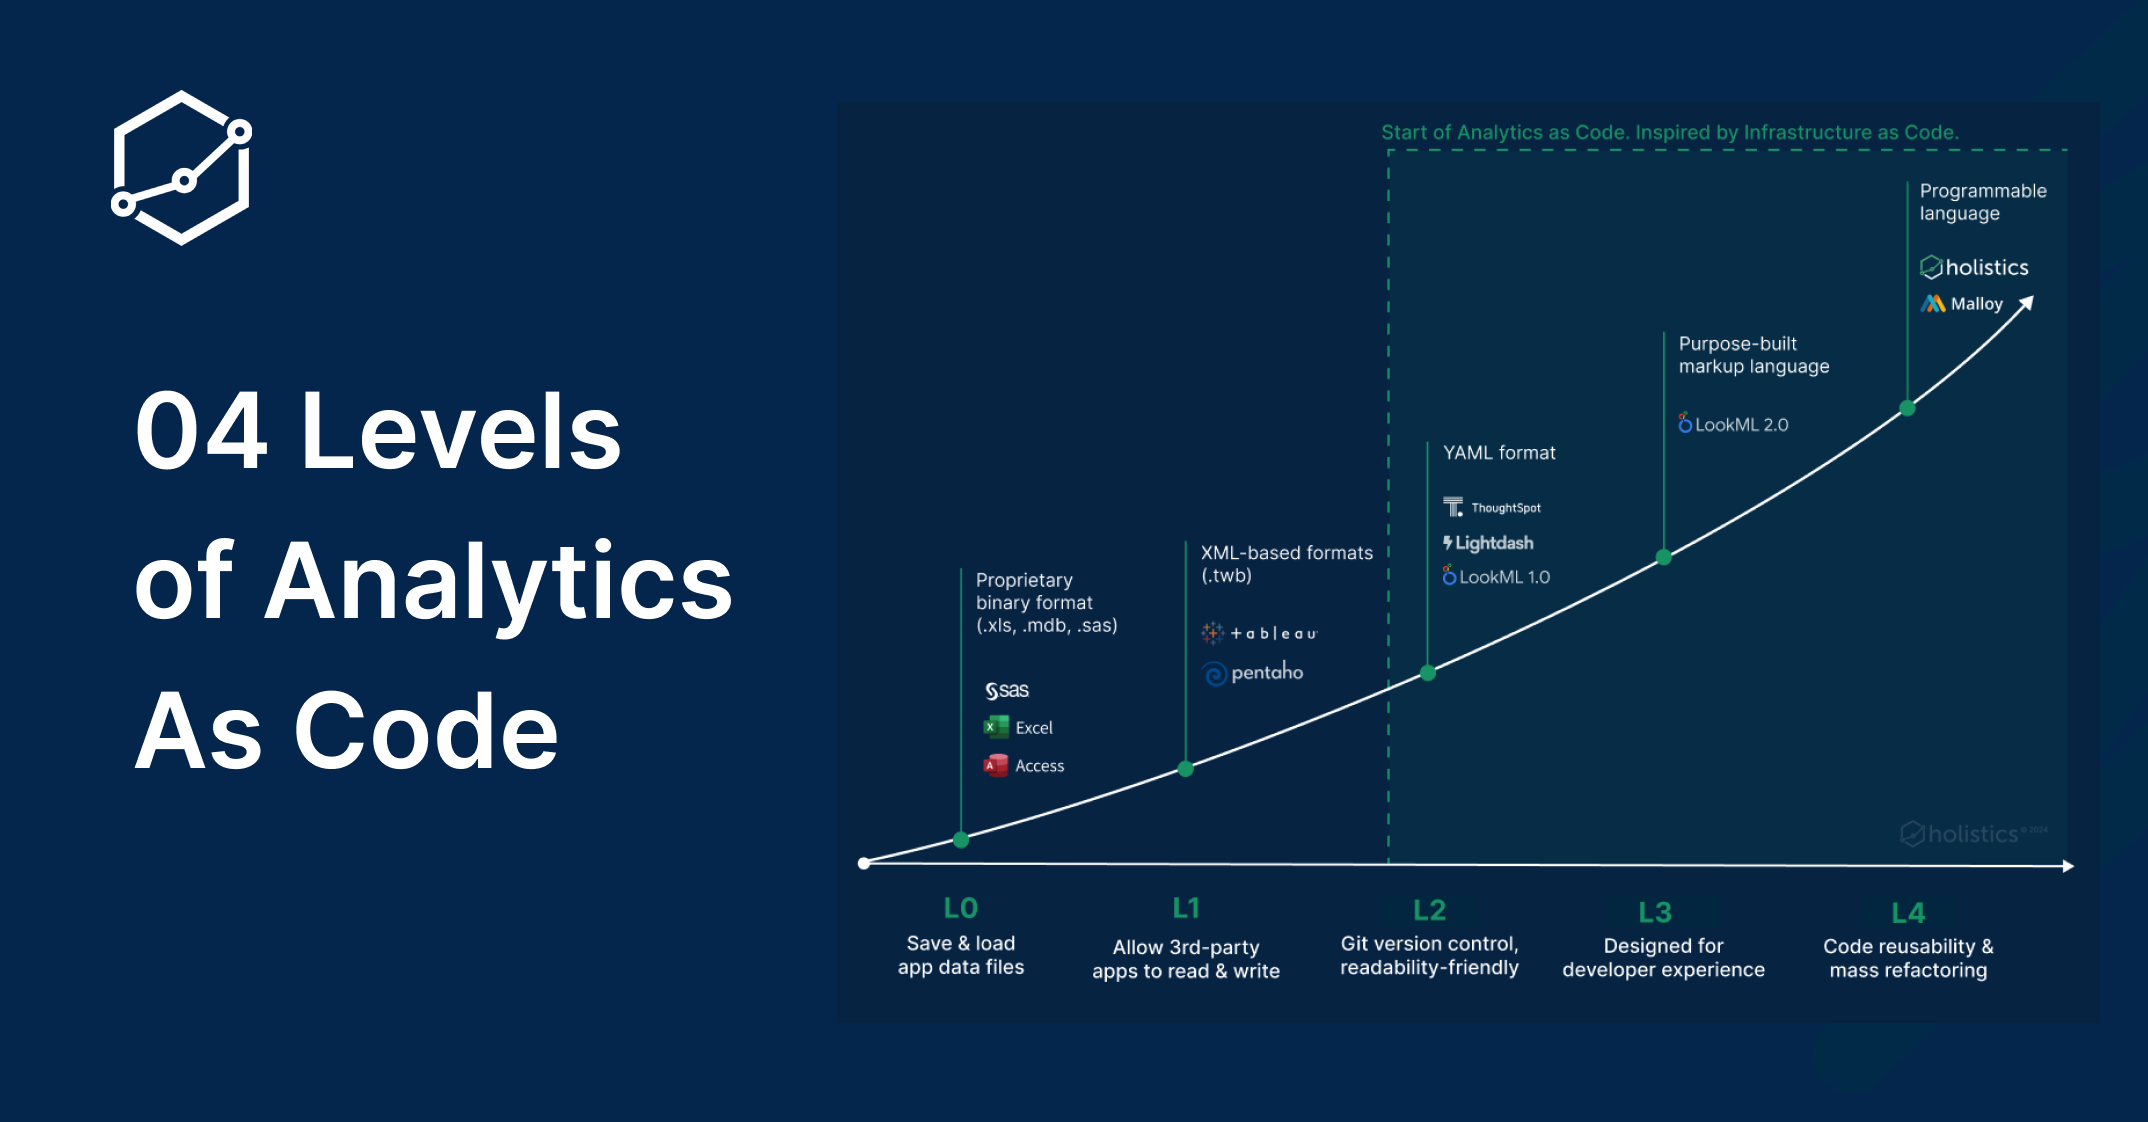 4 levels of Analytics-as-Code